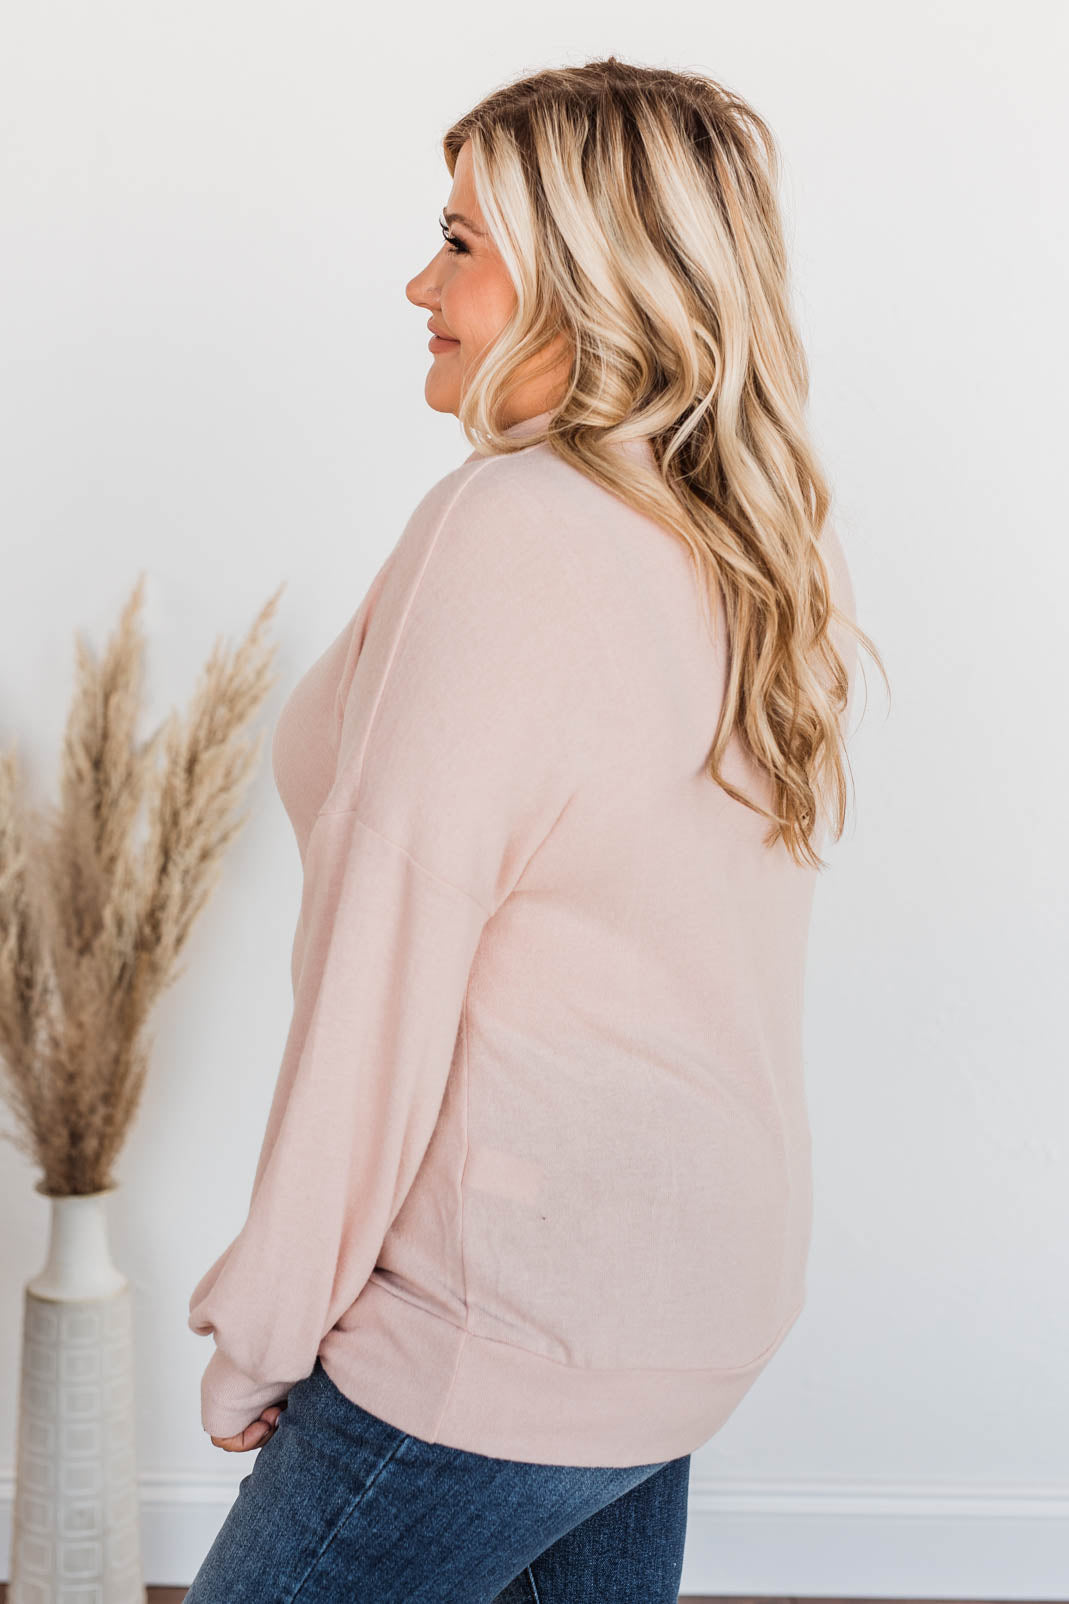 Priceless Moments Cowl Neck Top- Light Pink